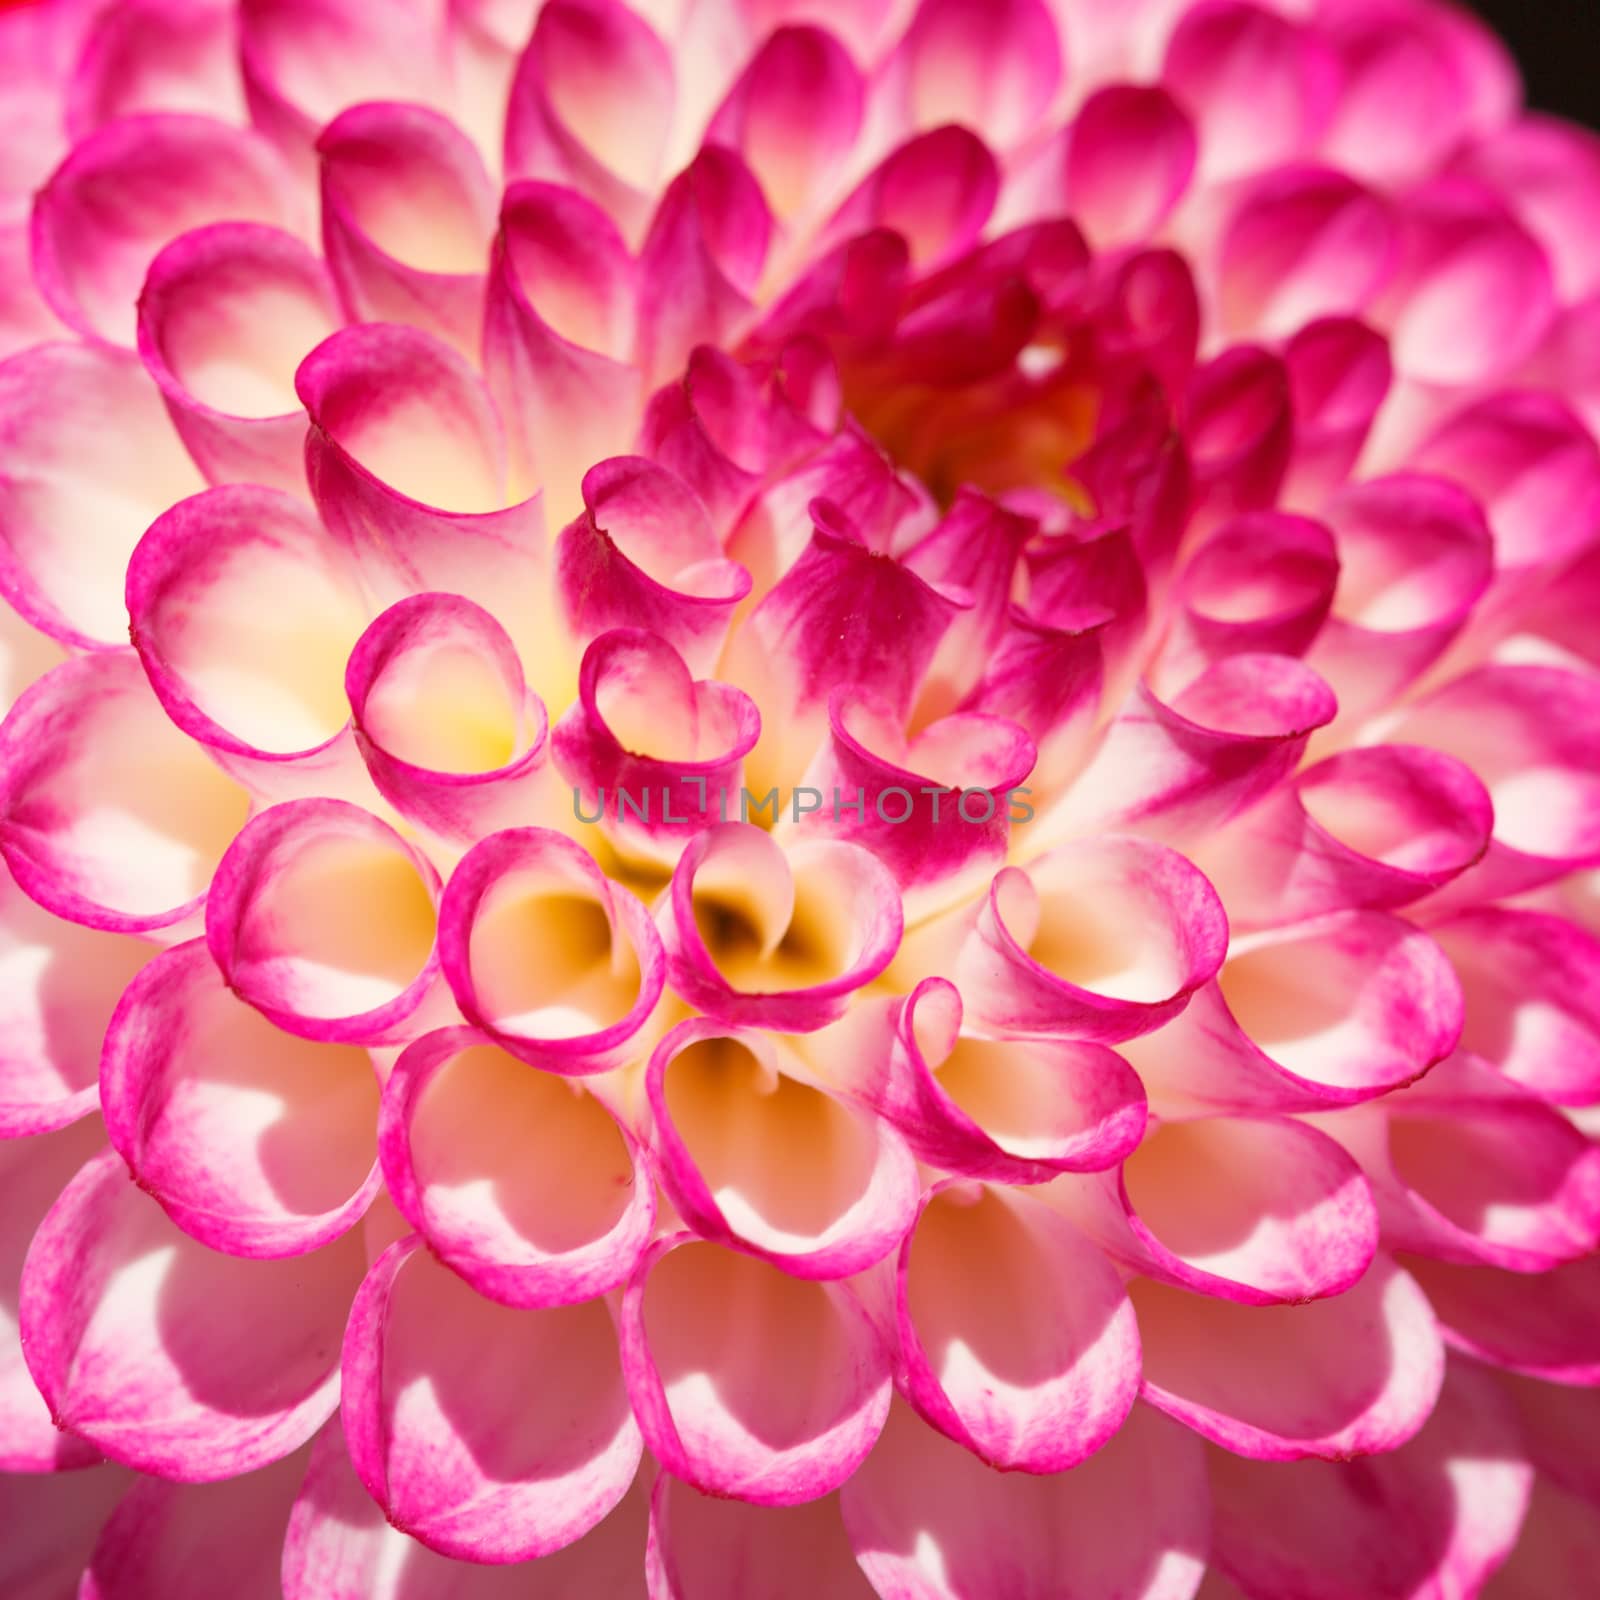 Close-up on Pink Dahlia flower with burgundy veins on the petals, abstract floral background.